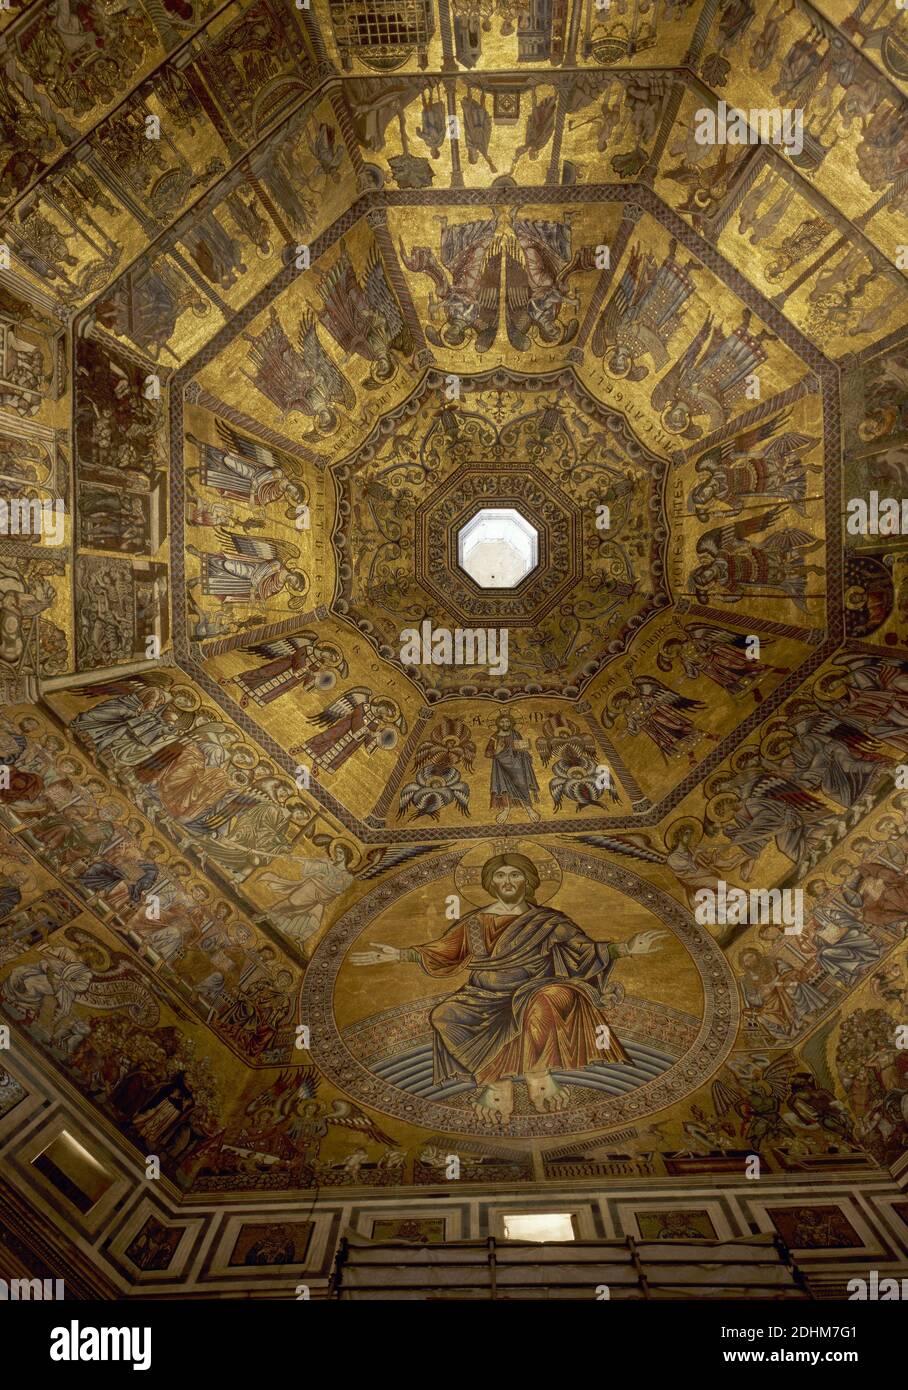 Italy, Florence. Baptistry of San Giovanni. Ceiling mosaic of the dome, 13th-14th centuries. Stock Photo